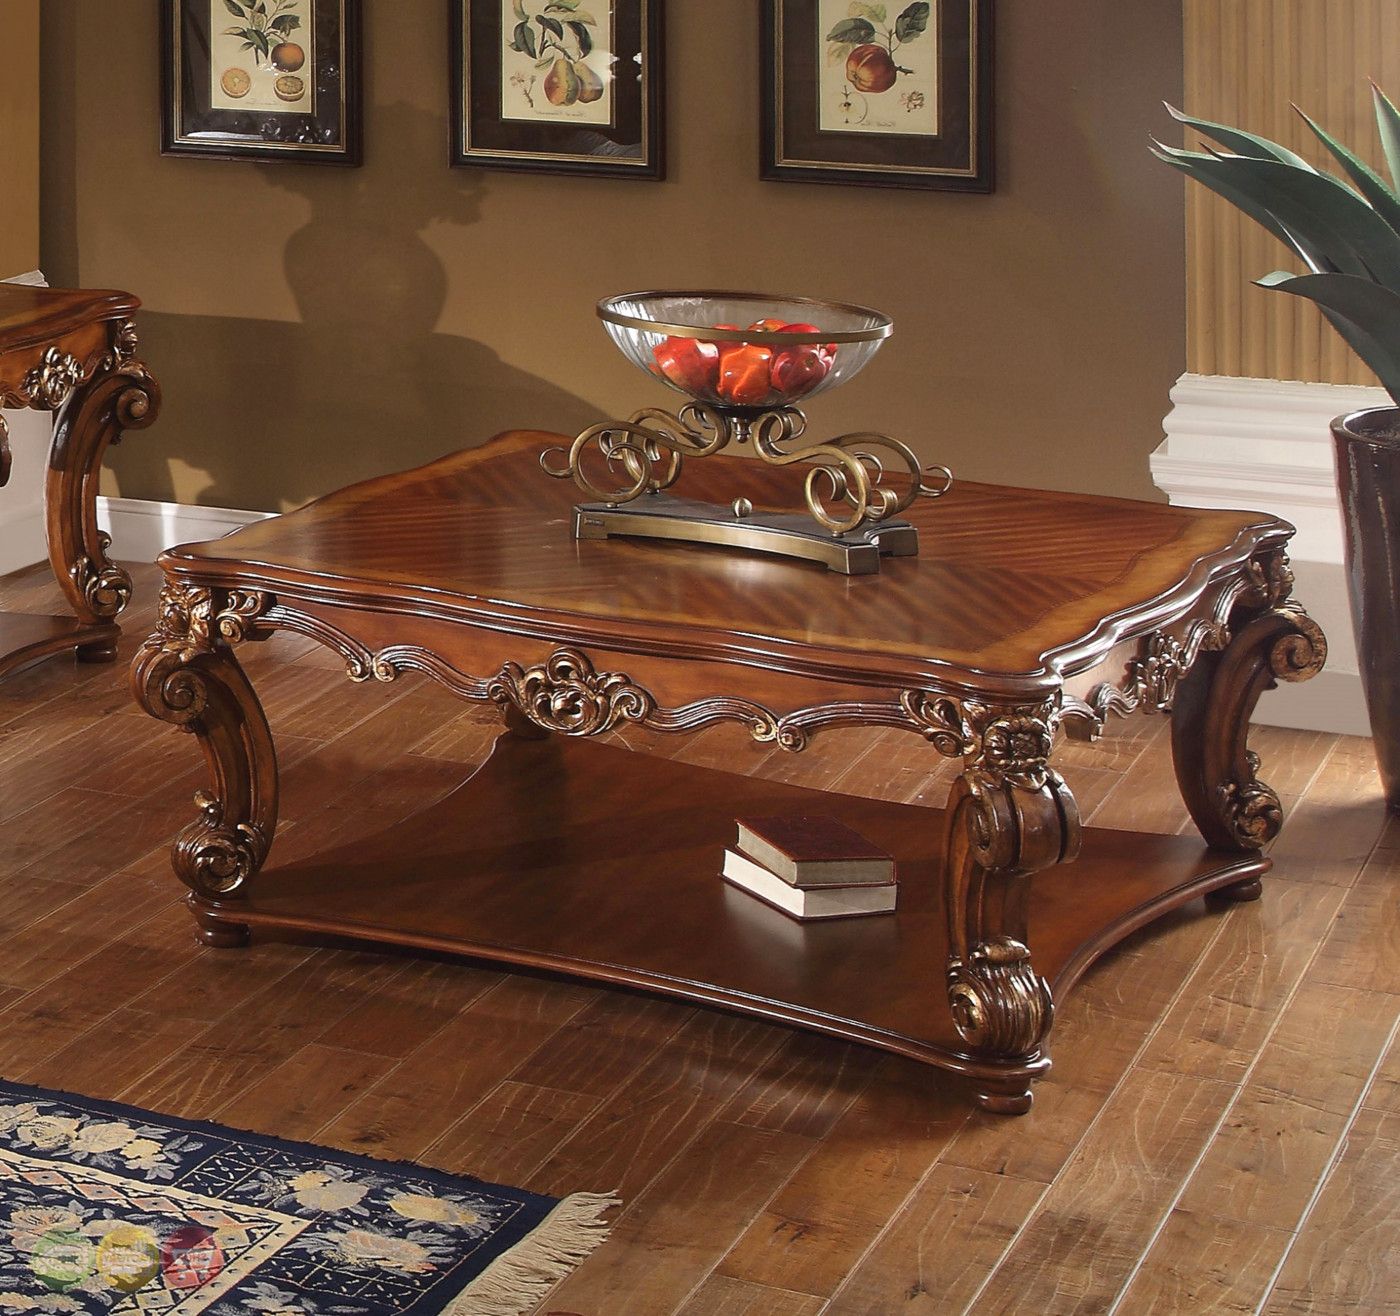 Most Current Vendome Traditional Ornate Coffee Table With Wood Top In Cherry Finish With Heartwood Cherry Wood Coffee Tables (View 5 of 10)